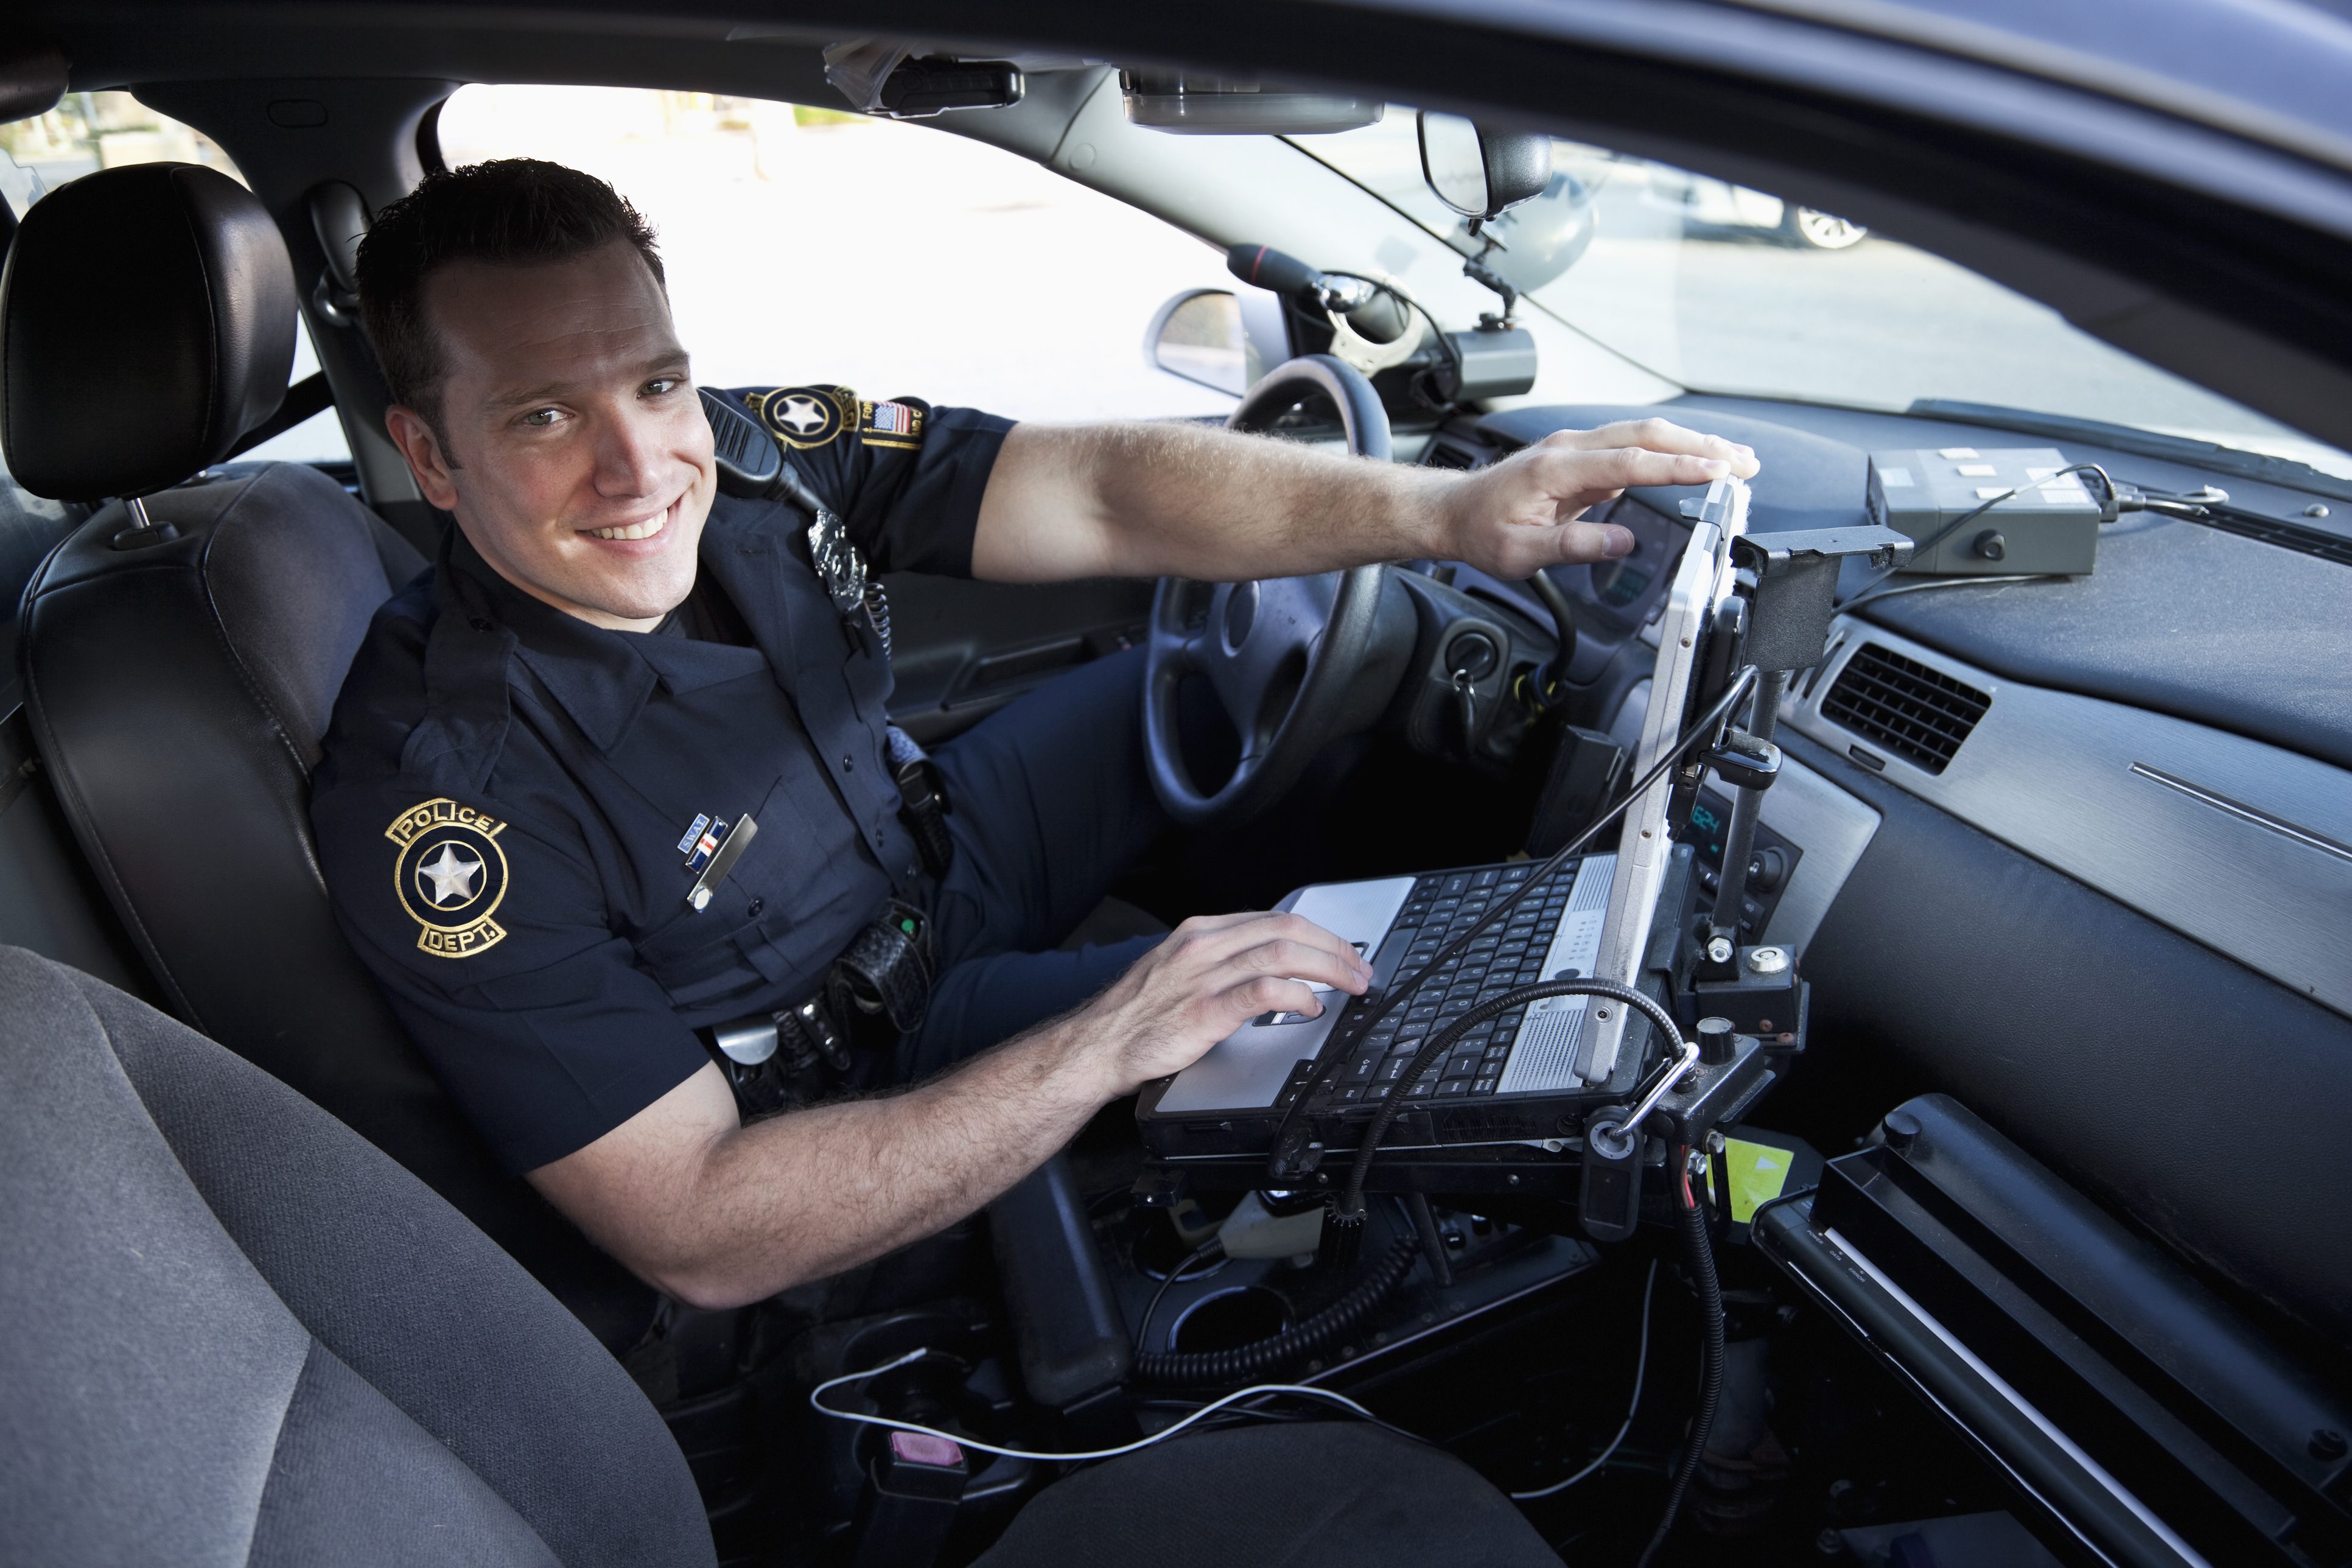 Online Dating: Would You Date A Police Officer?